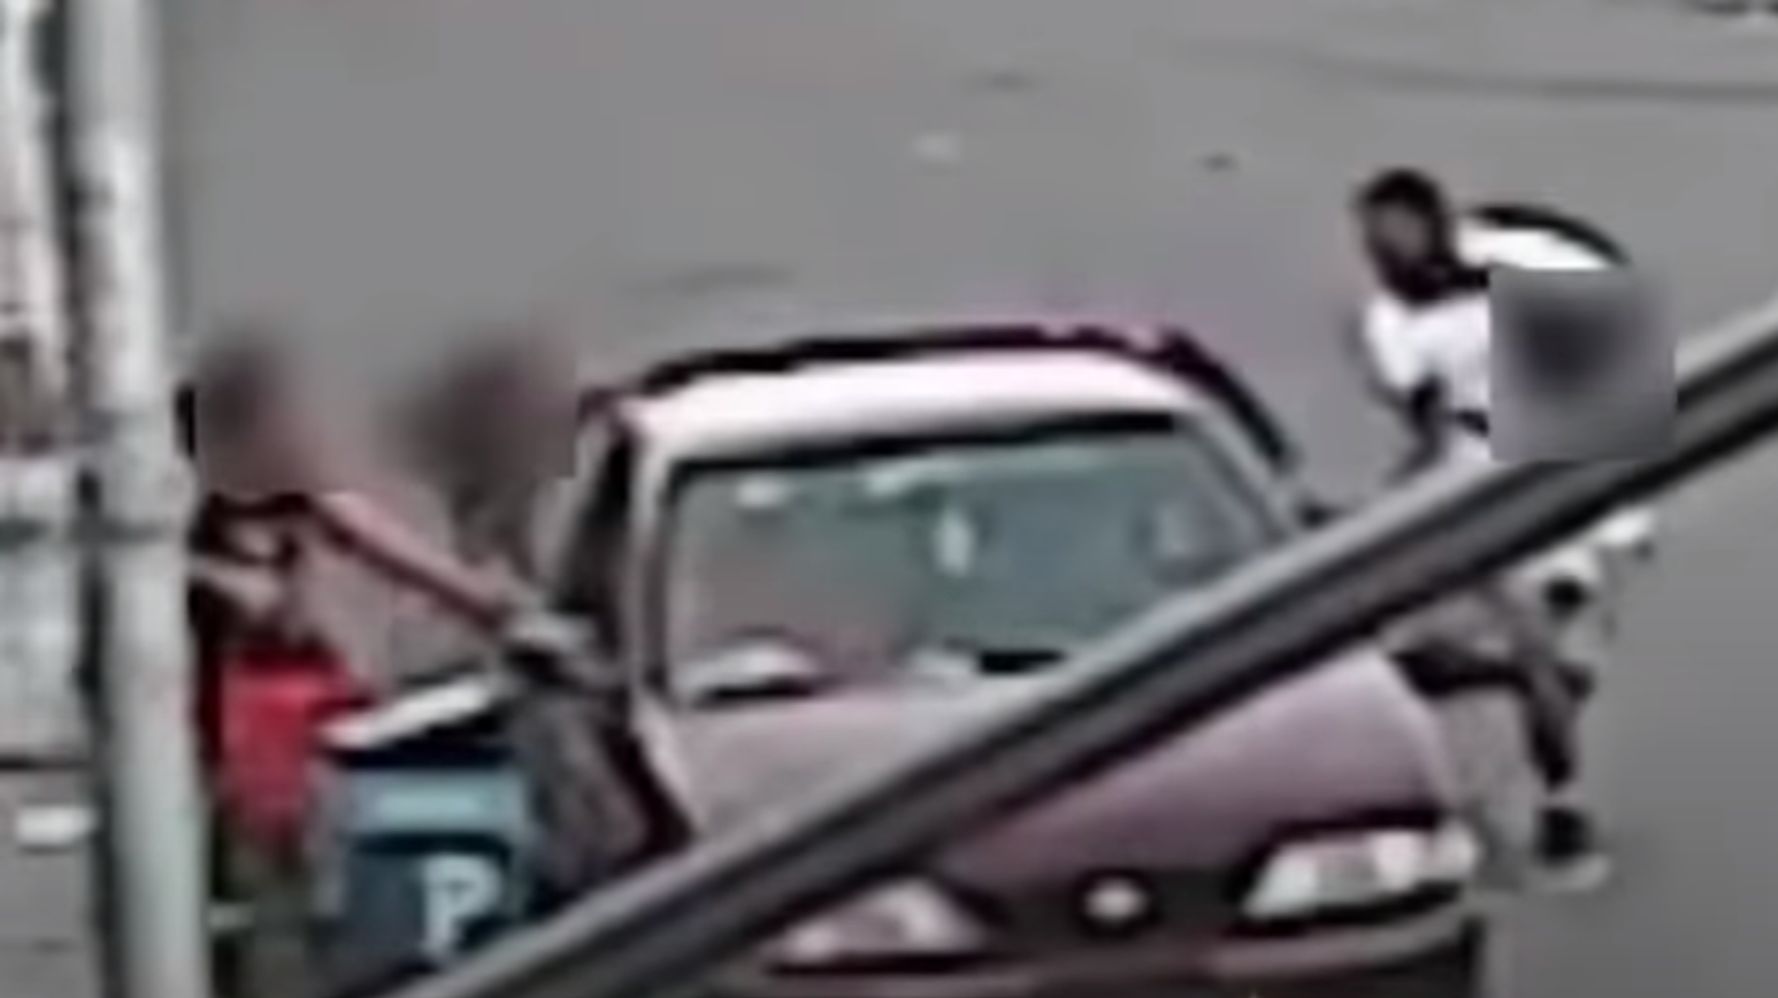 Video Captures Amazing Save By Mom Who Pulls Son From Car Window After Kidnap Attempt